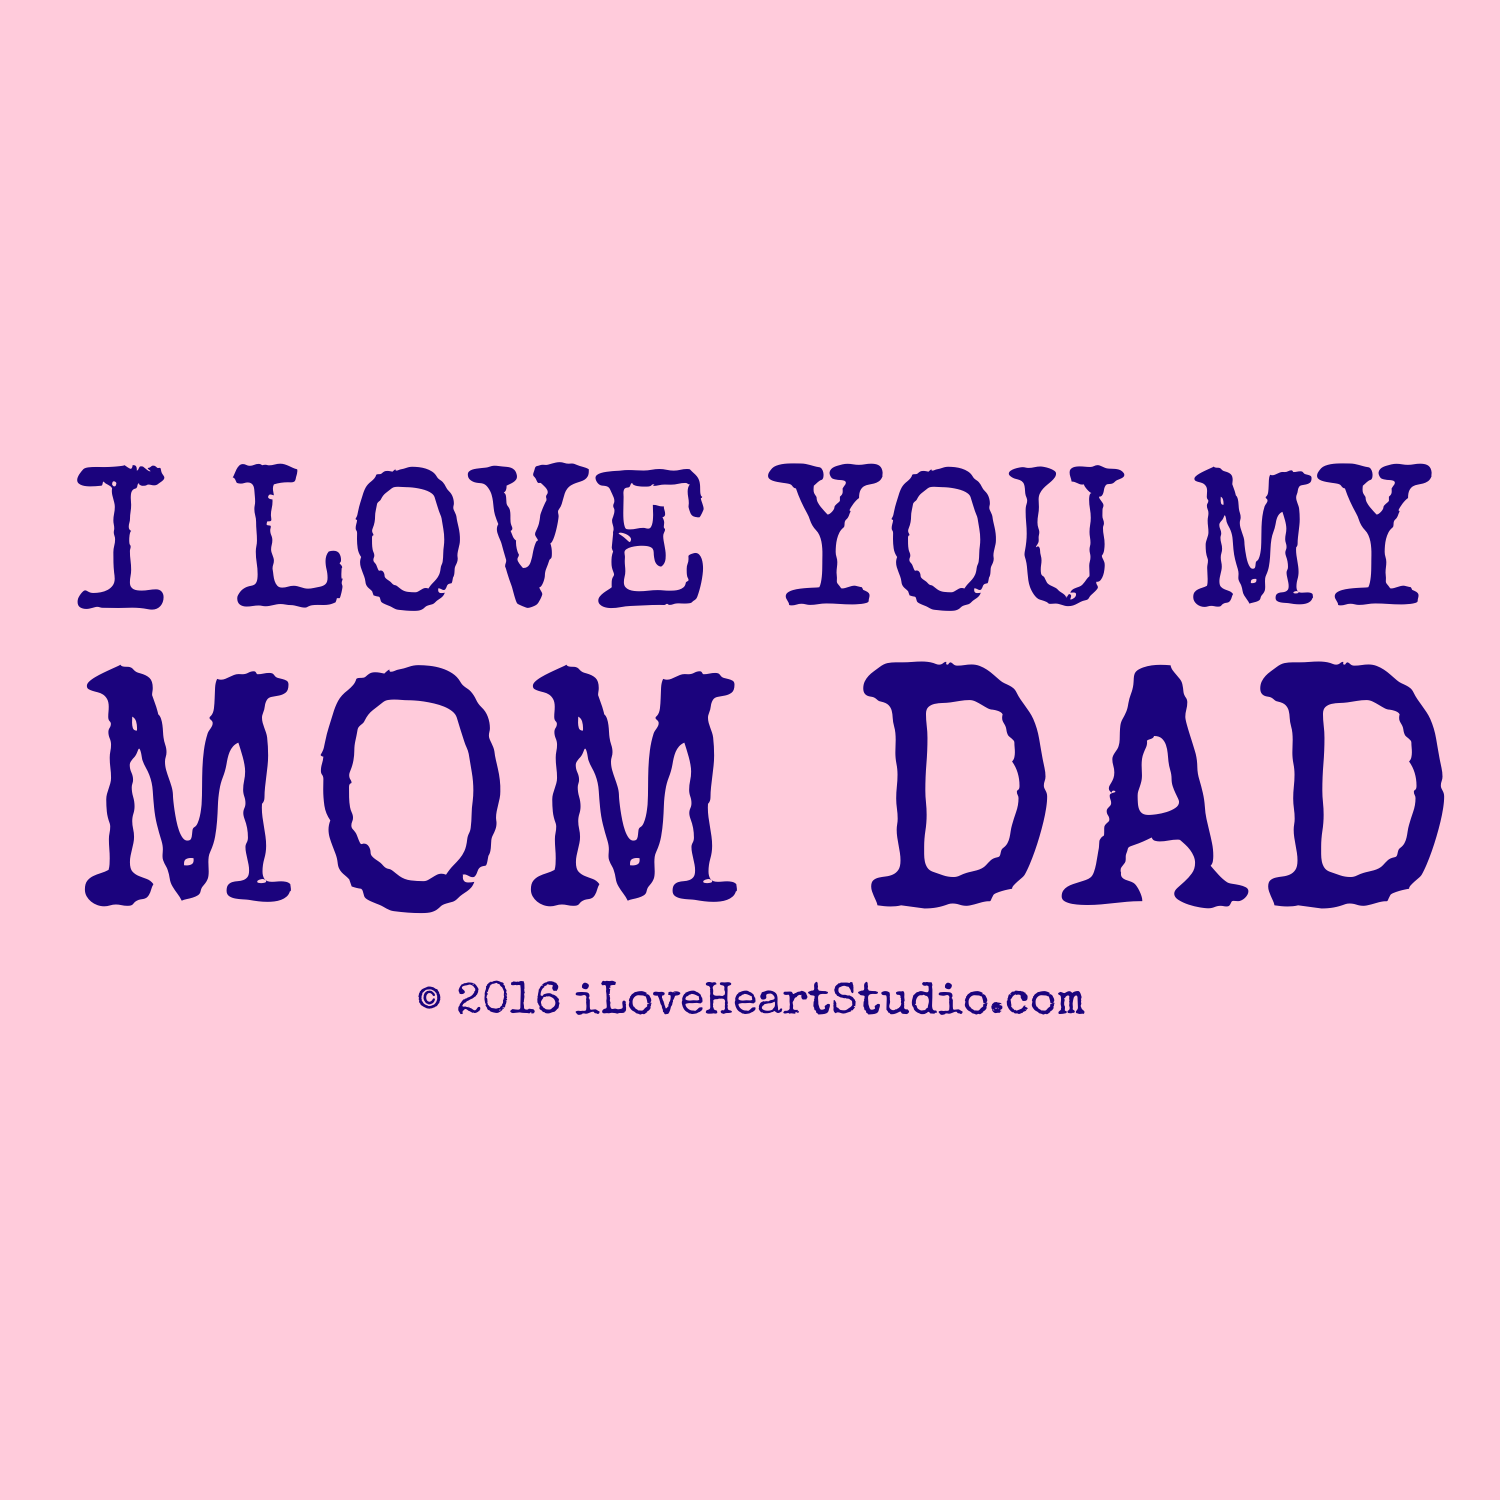 I Love My Mom And Dad Wallpapers - Love You My Mum - HD Wallpaper 